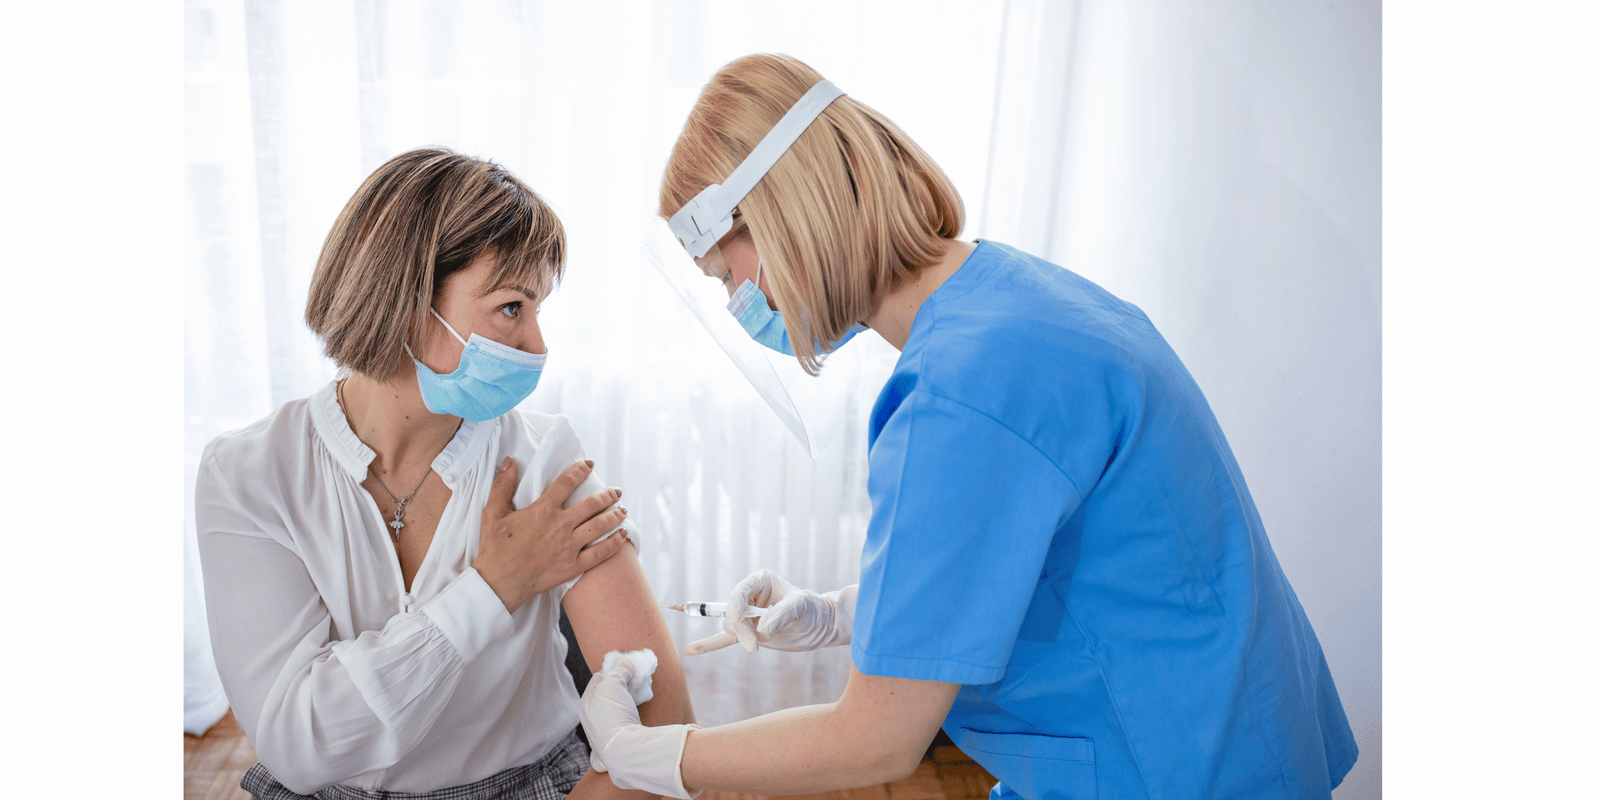 What are the benefits of vaccinations?